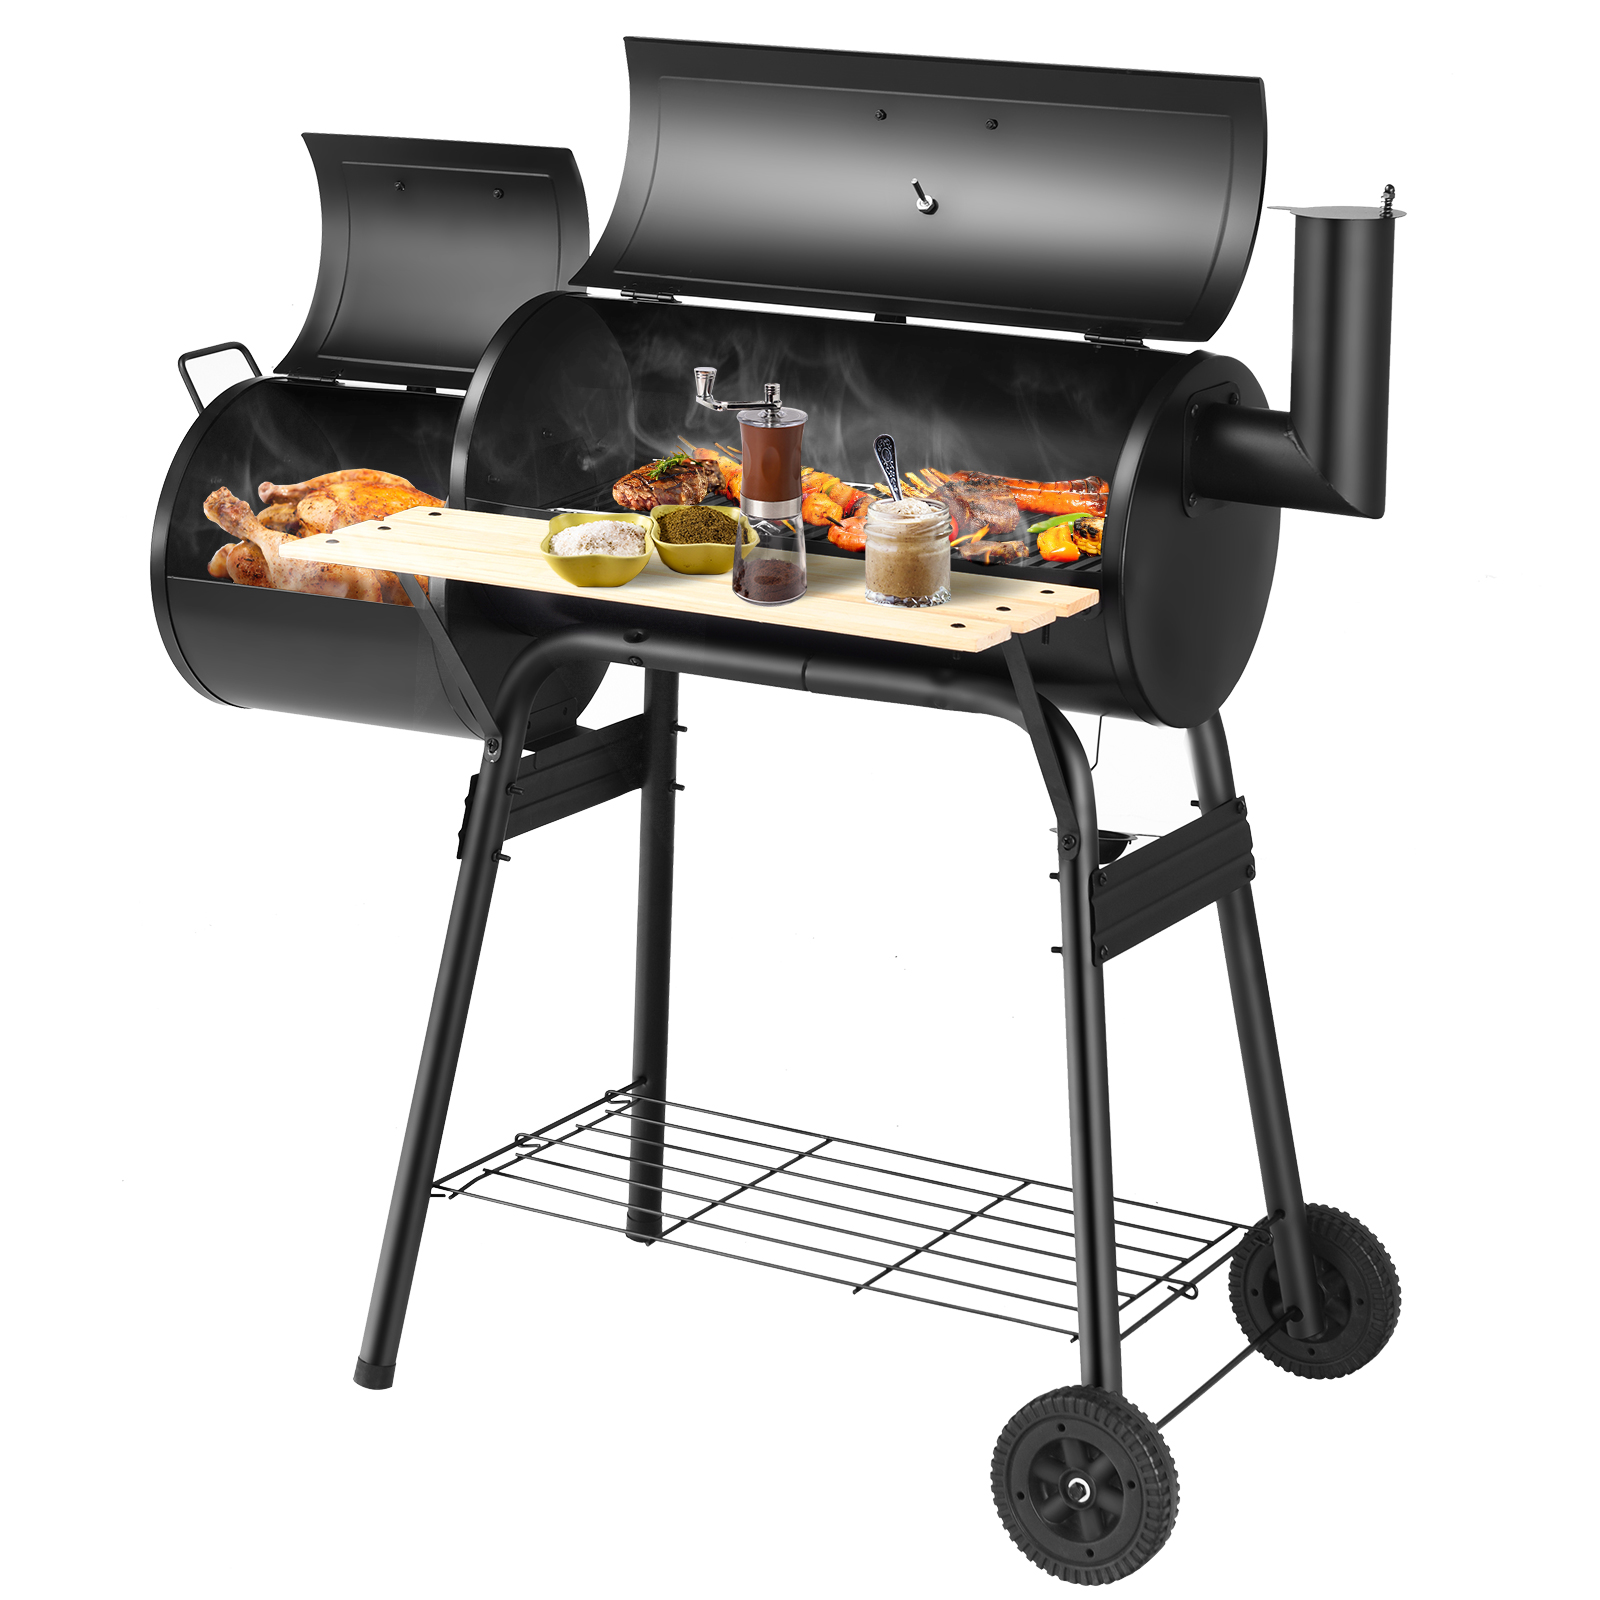 Topbuy BBQ Grill Charcoal Barbecue Meat Smoker Backyard Camping - image 1 of 10